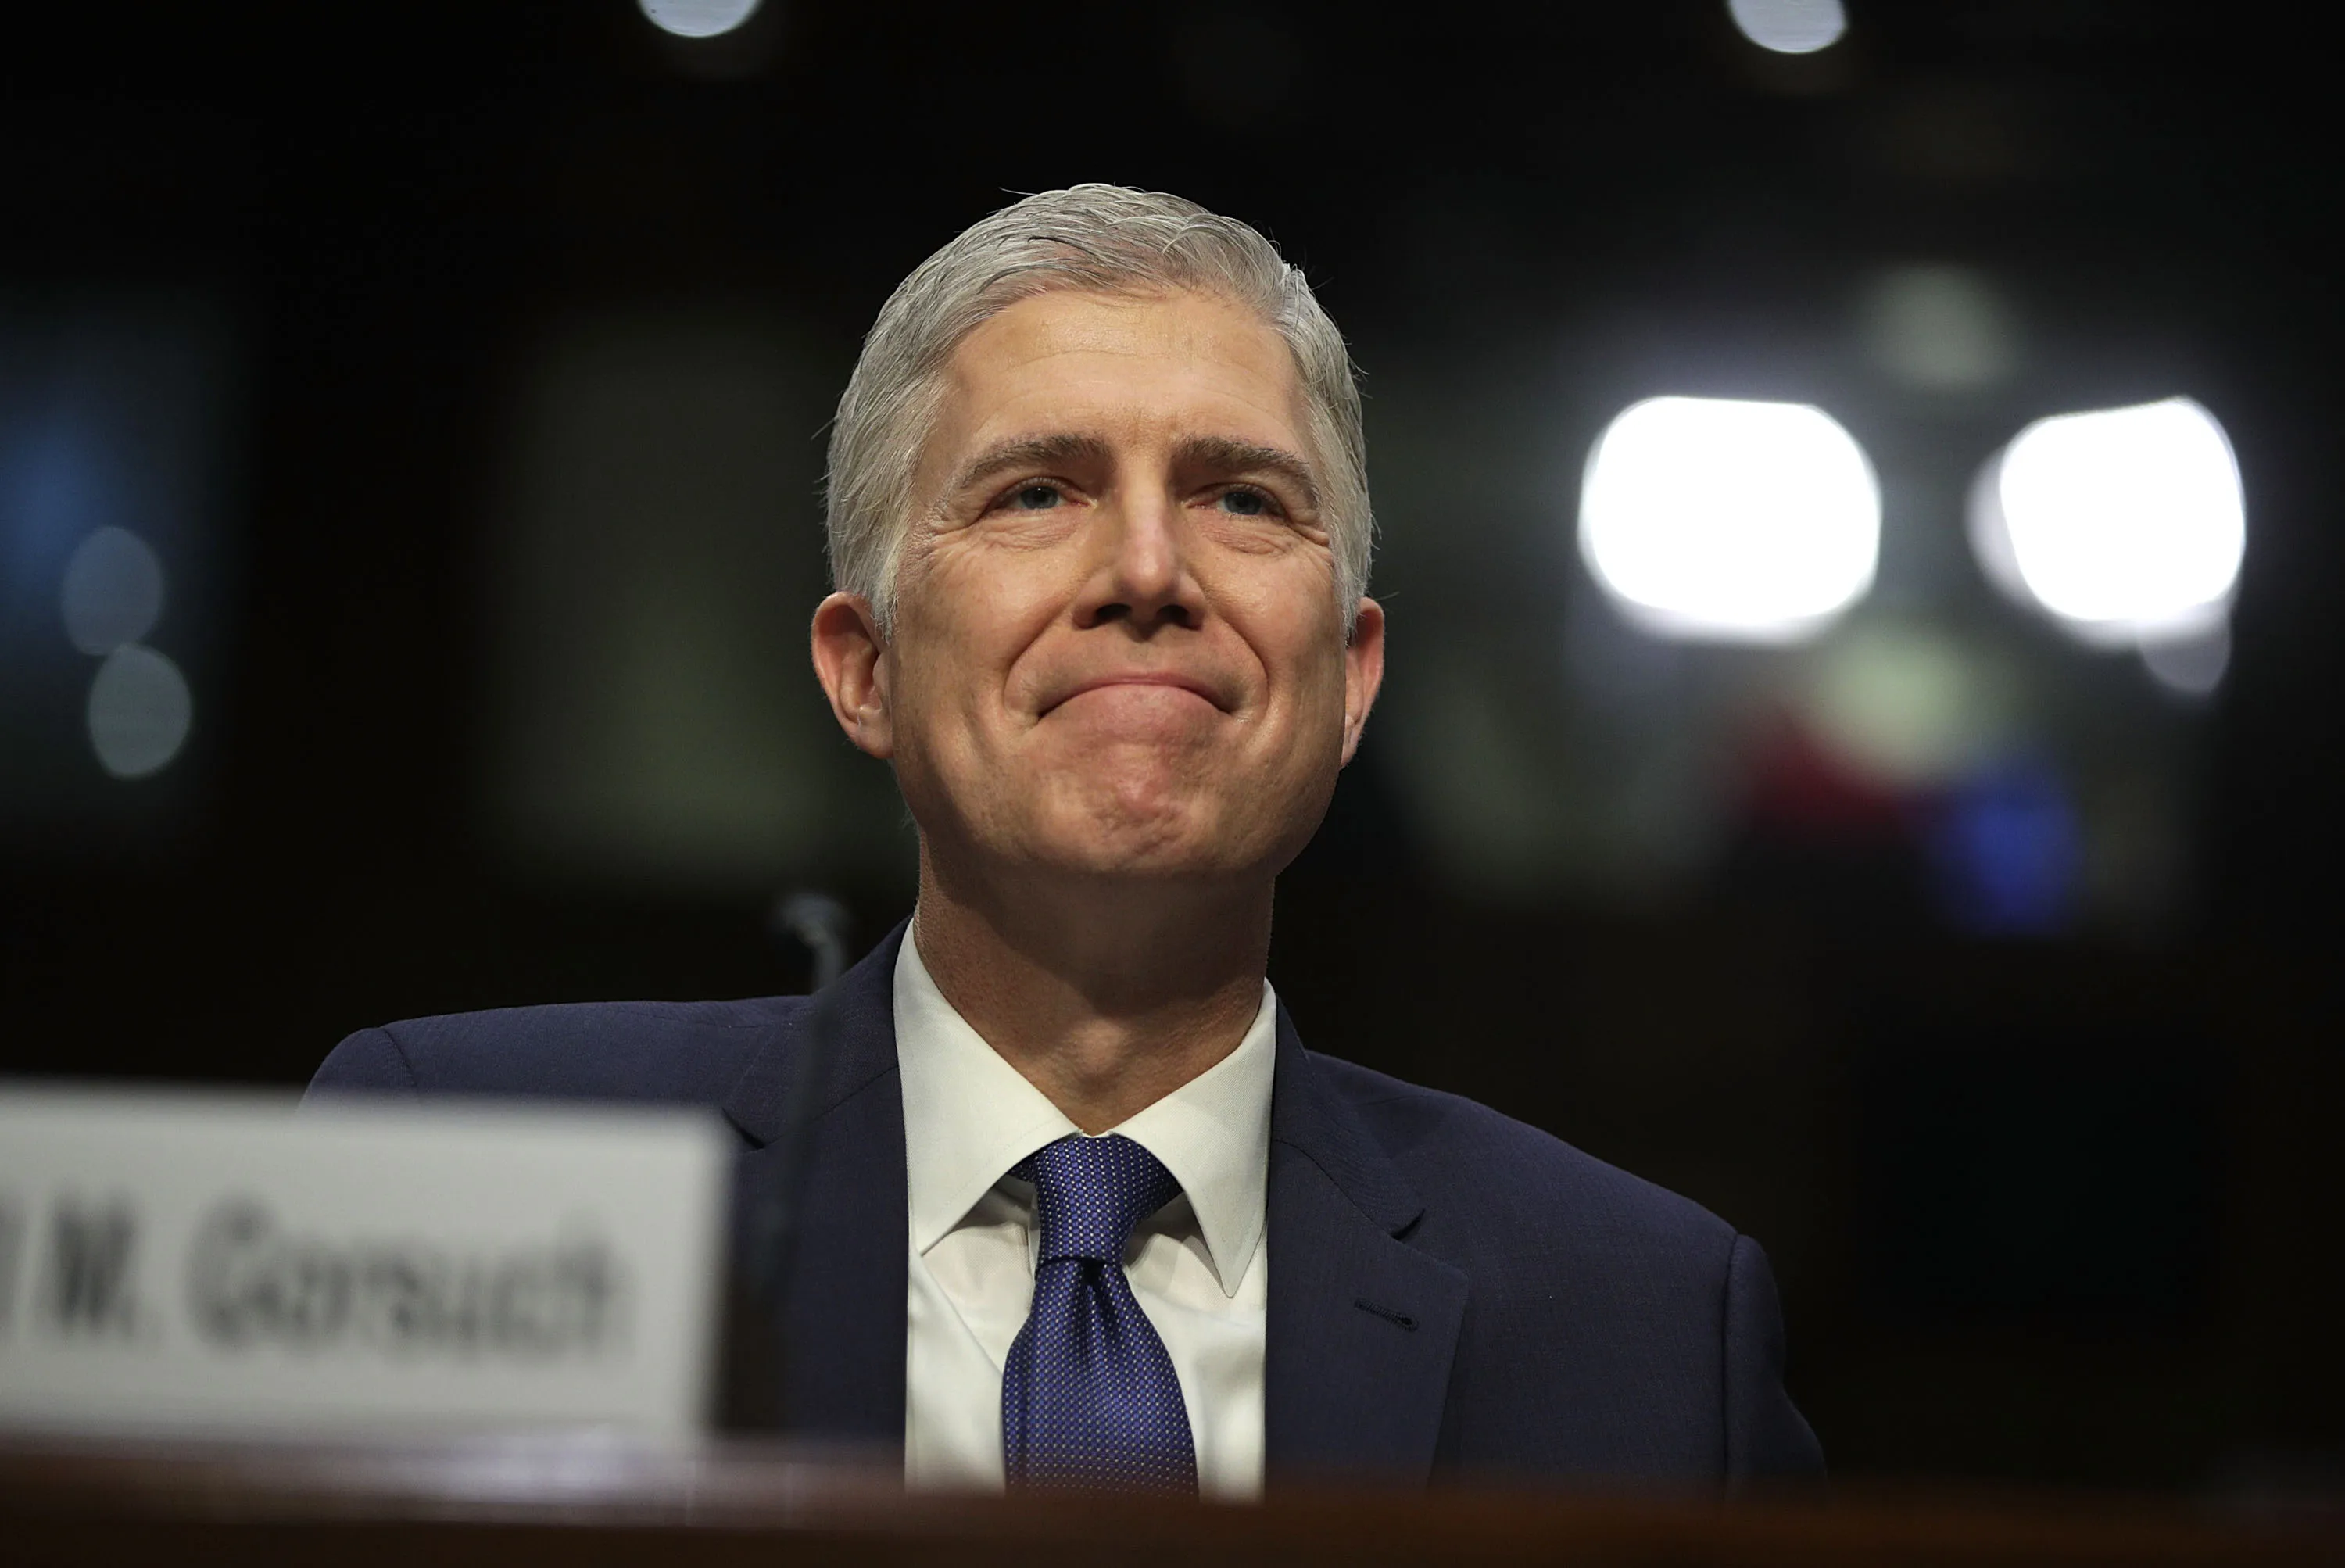 Judge Neil Gorsuch listens during his Supreme Court confirmation hearing before the Senate Judiciary Committee, March 20, 2017. ?w=200&h=150